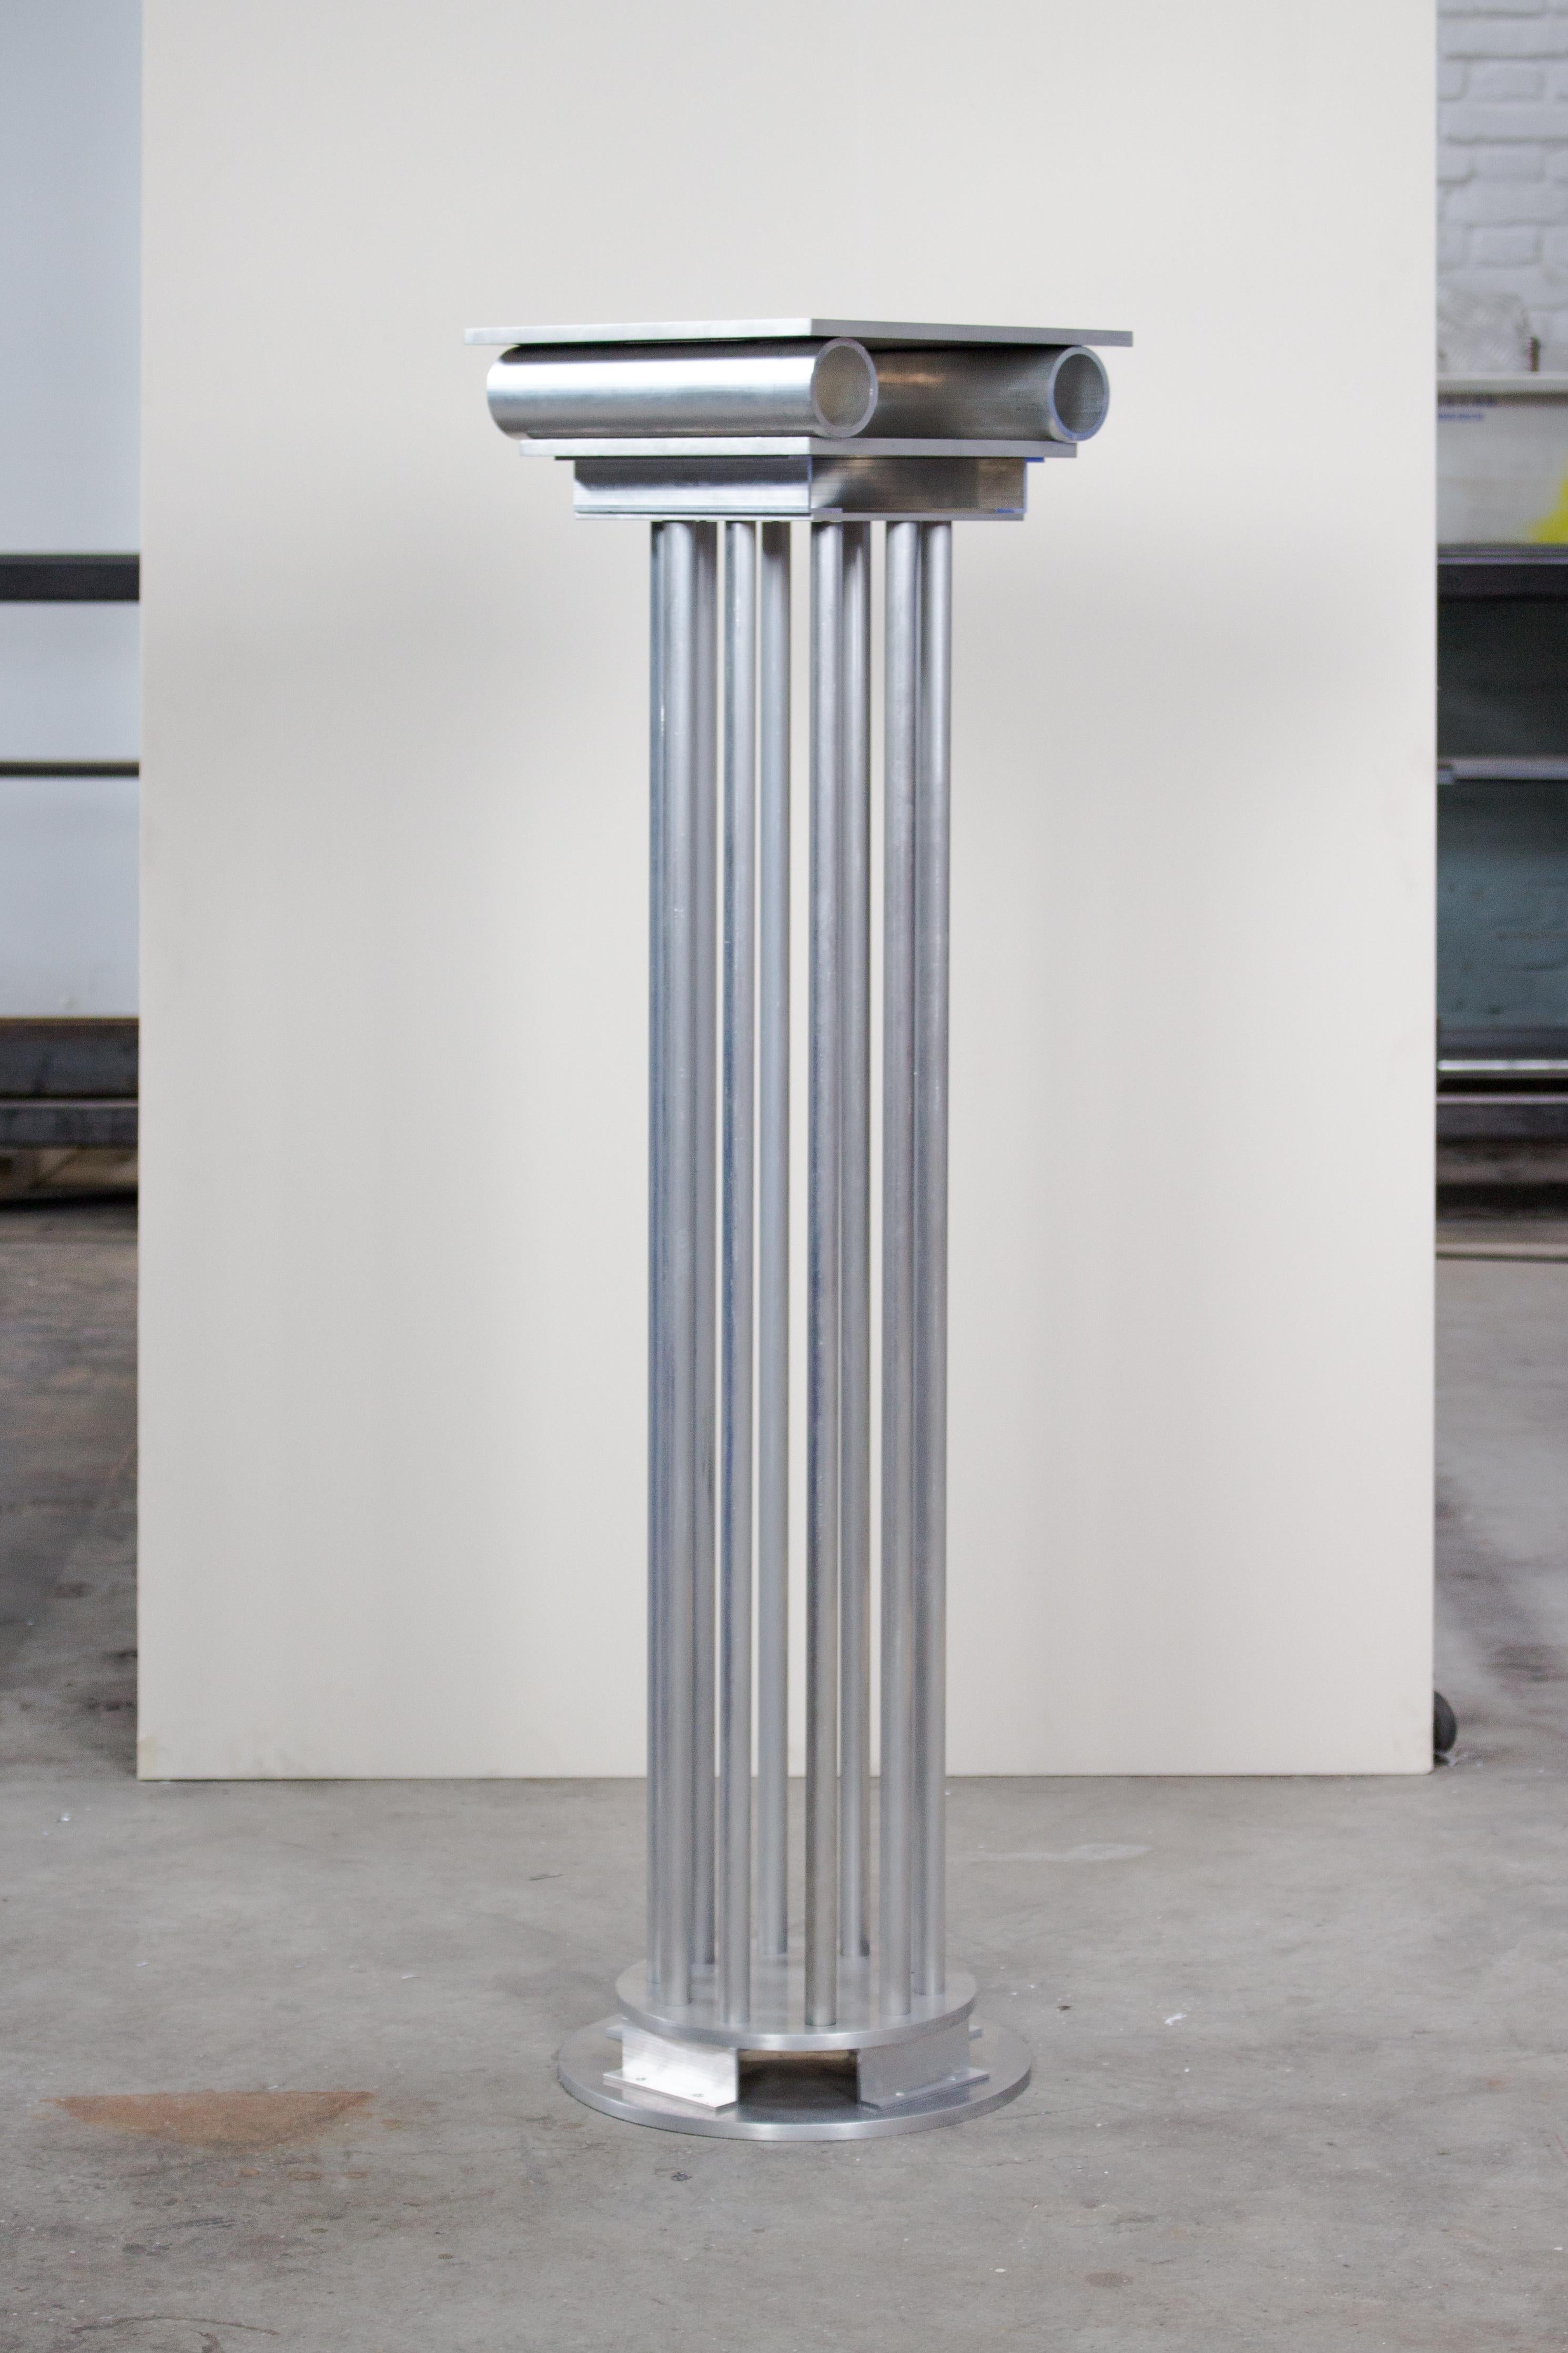 Metope column by Joachim-Morineau Studio
Limited Edition of 8
Dimensions: H 110 x D 30 x W 30 cm, 20 kg
Materials: Aluminium tubes, profiles, screws and sheets
Possibility to have a different colour/finish (such as blasted or anodized